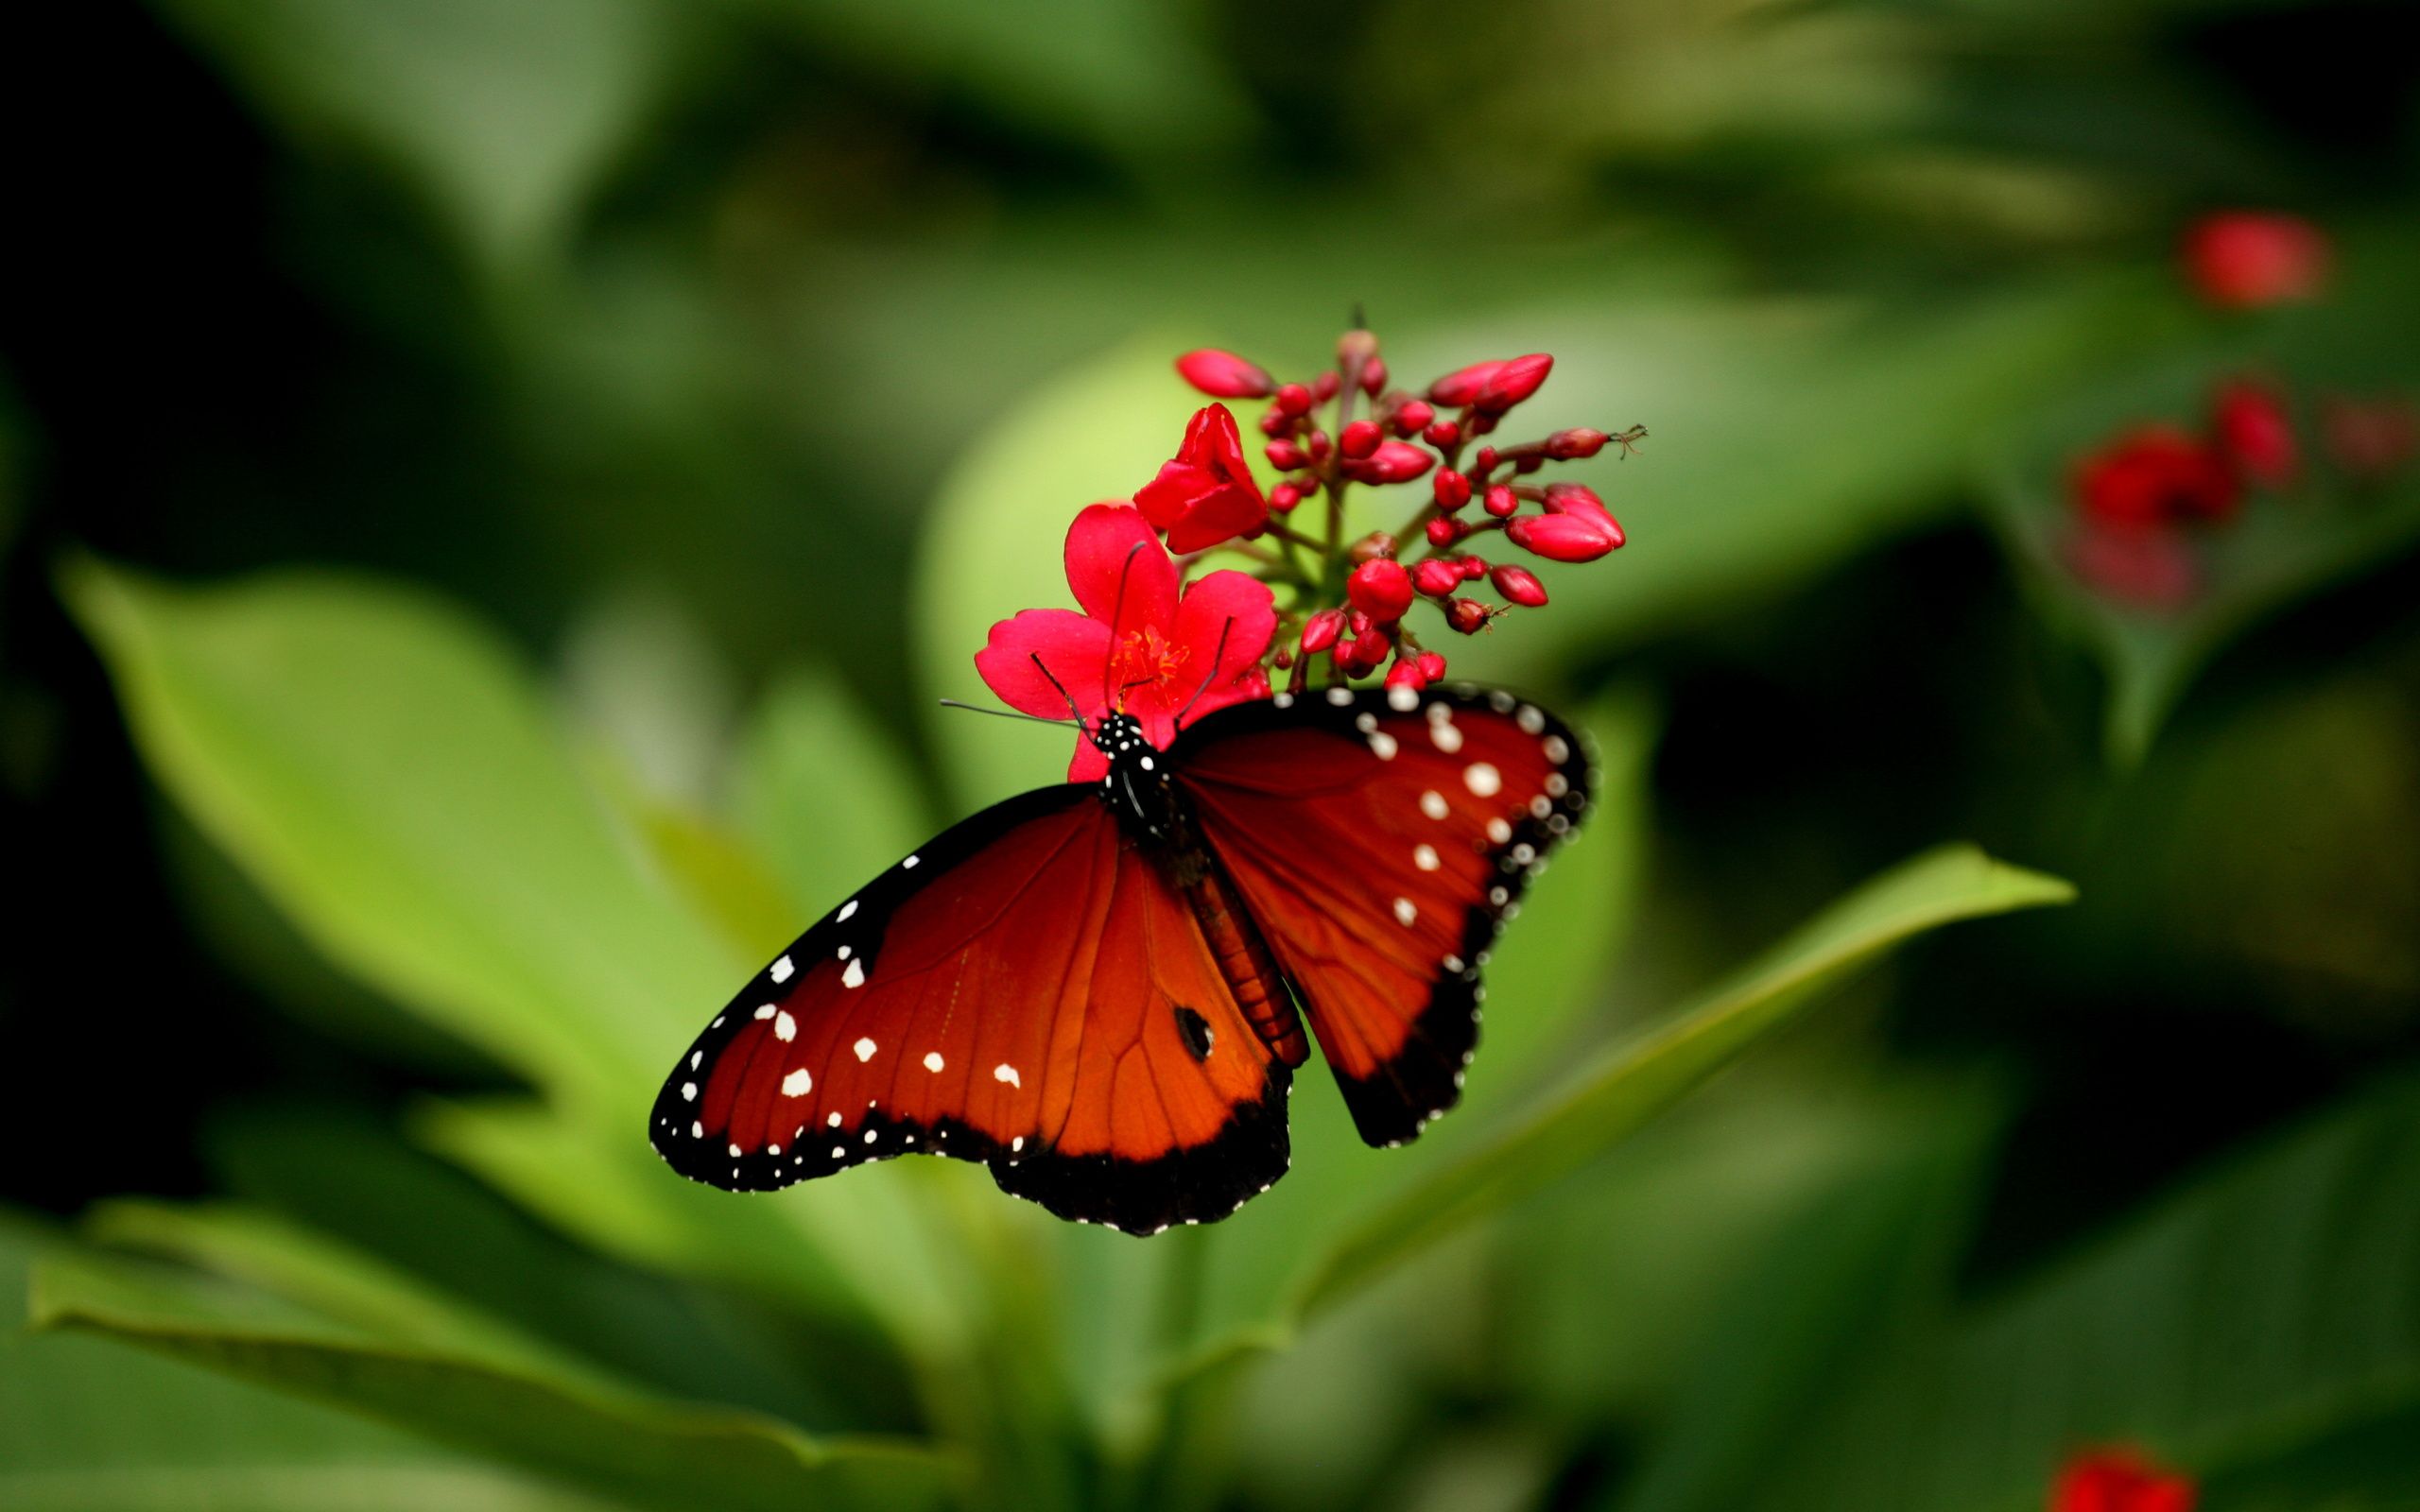 Beautiful Butterfly | wallpapers55.com - Best Wallpapers for PCs ...